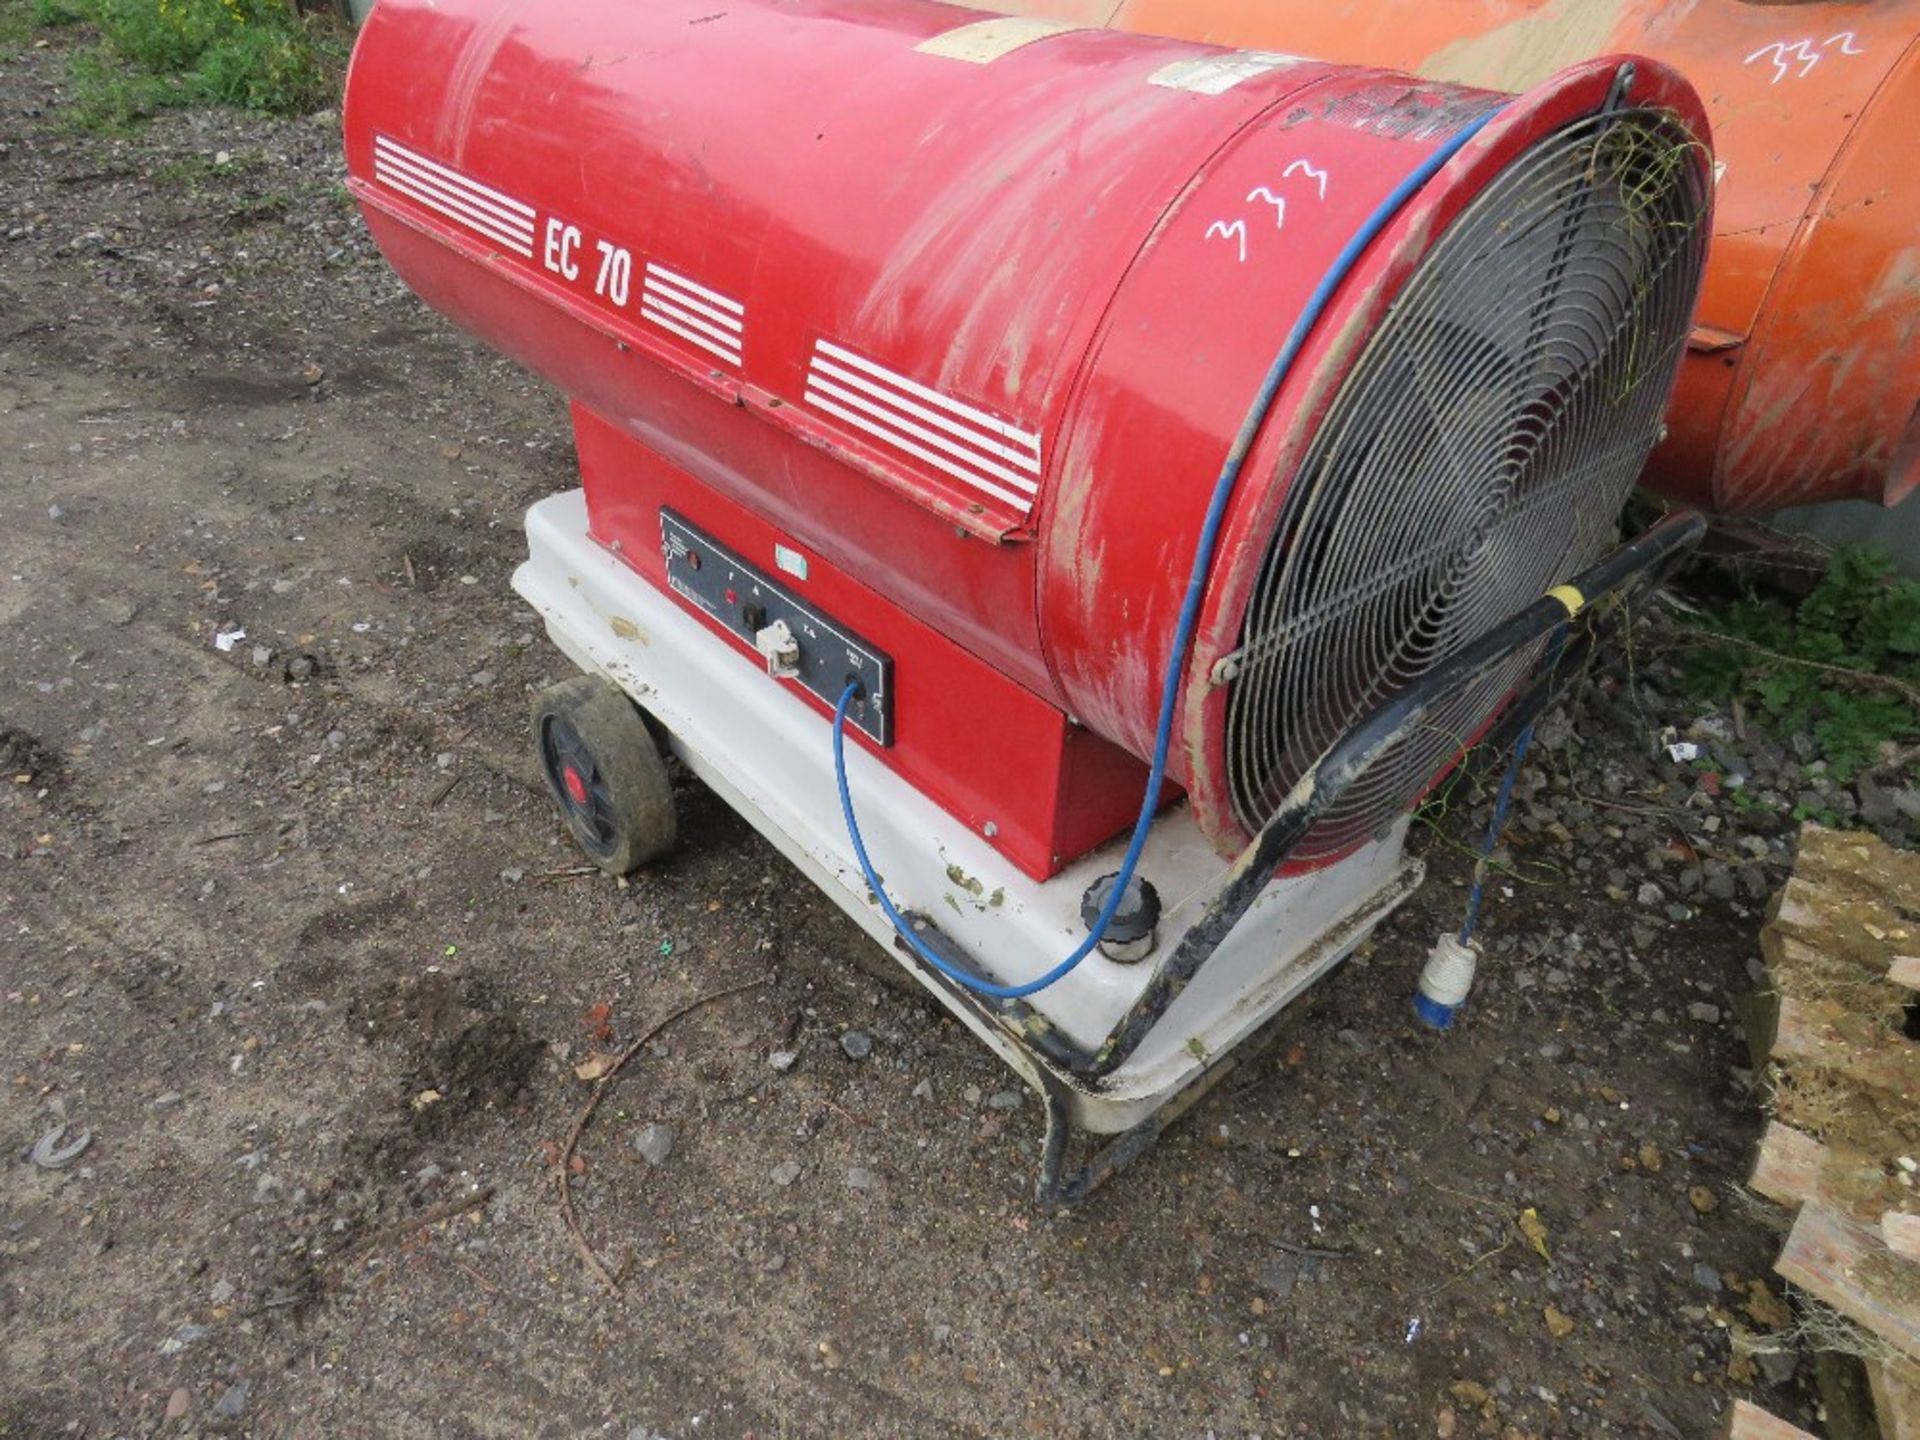 EC70 240VOLT INDUSTRIAL/GREENHOUSE HEATER, UNTESTED, CONDITION UNKNOWN.